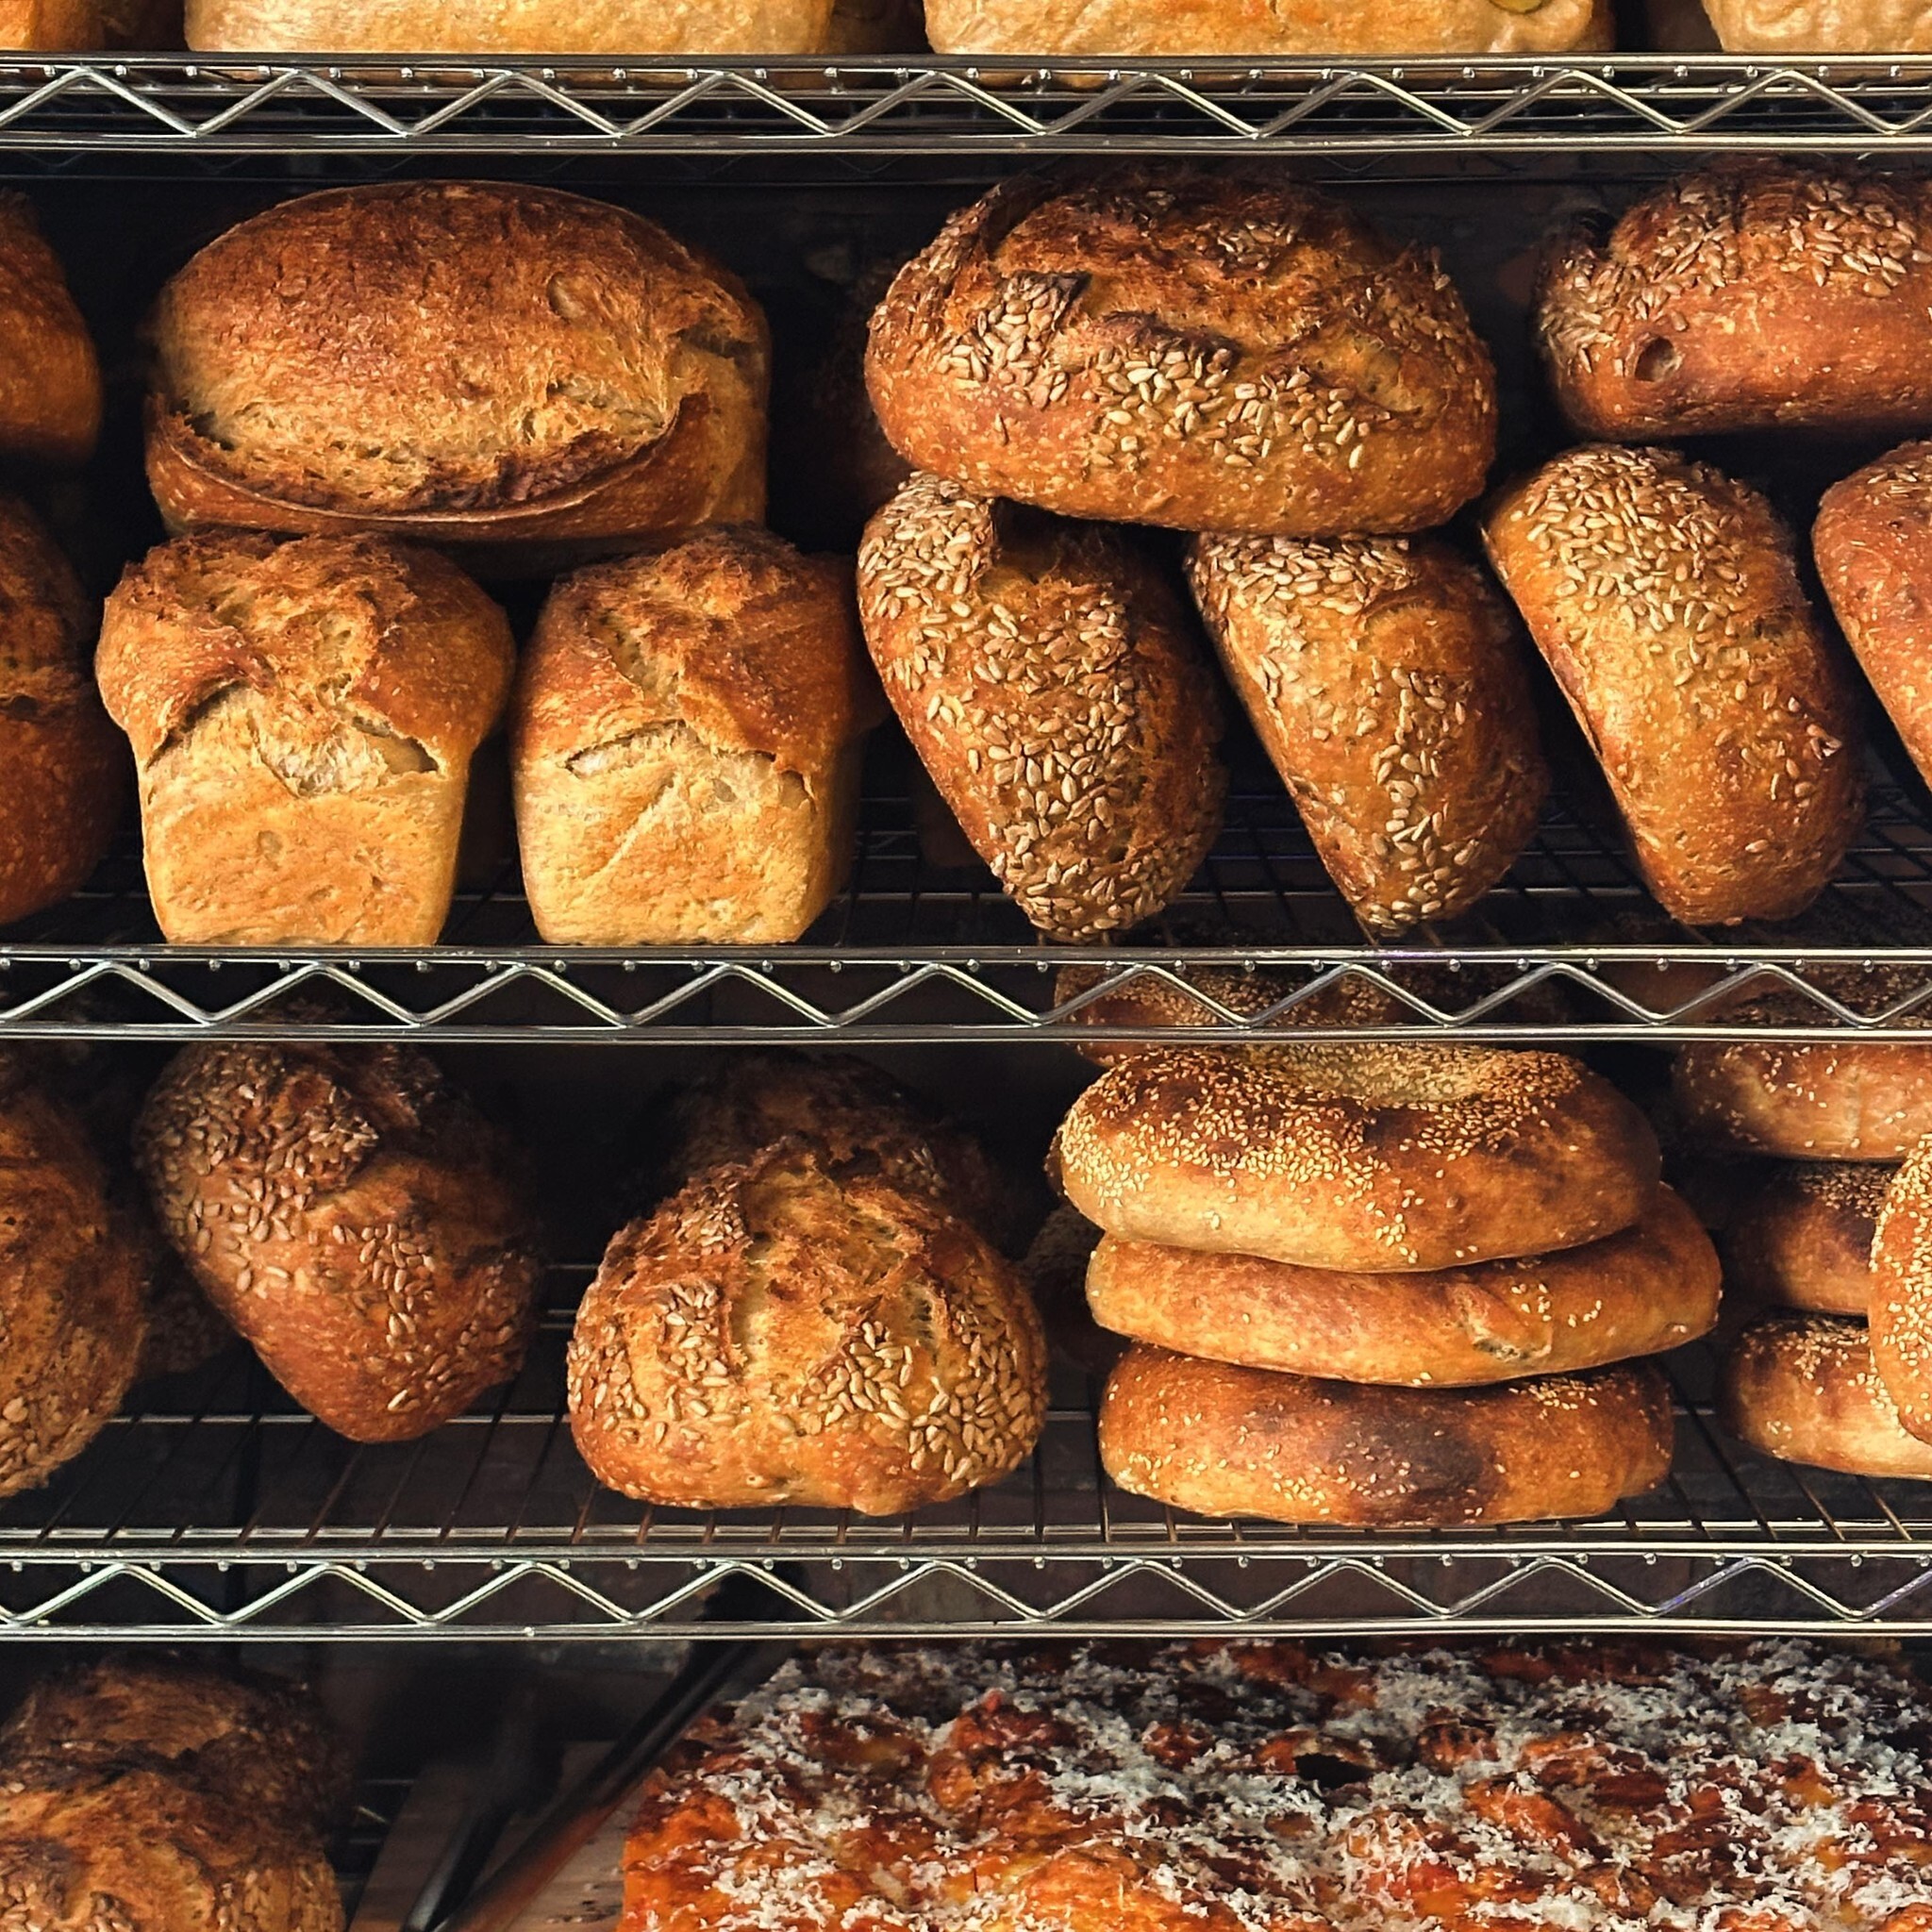 a metal bakery shelf filled completely with differently-shaped loaves of artisanal bread.